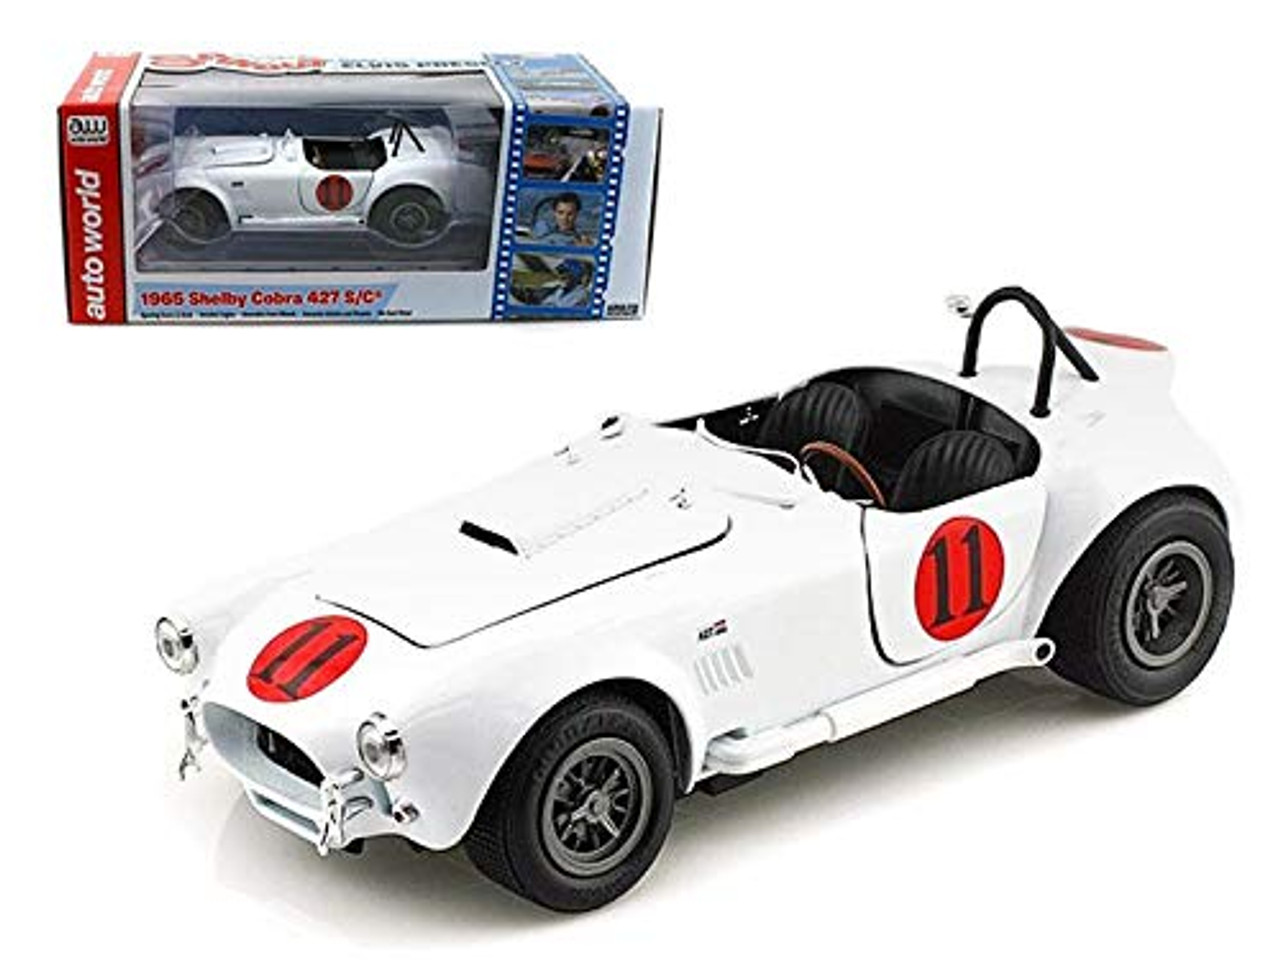 1965 Shelby Cobra 427 S/C #11 Elvis Presley Spinout White 1/18 Scale  Diecast Car Model By Auto World AWSS104